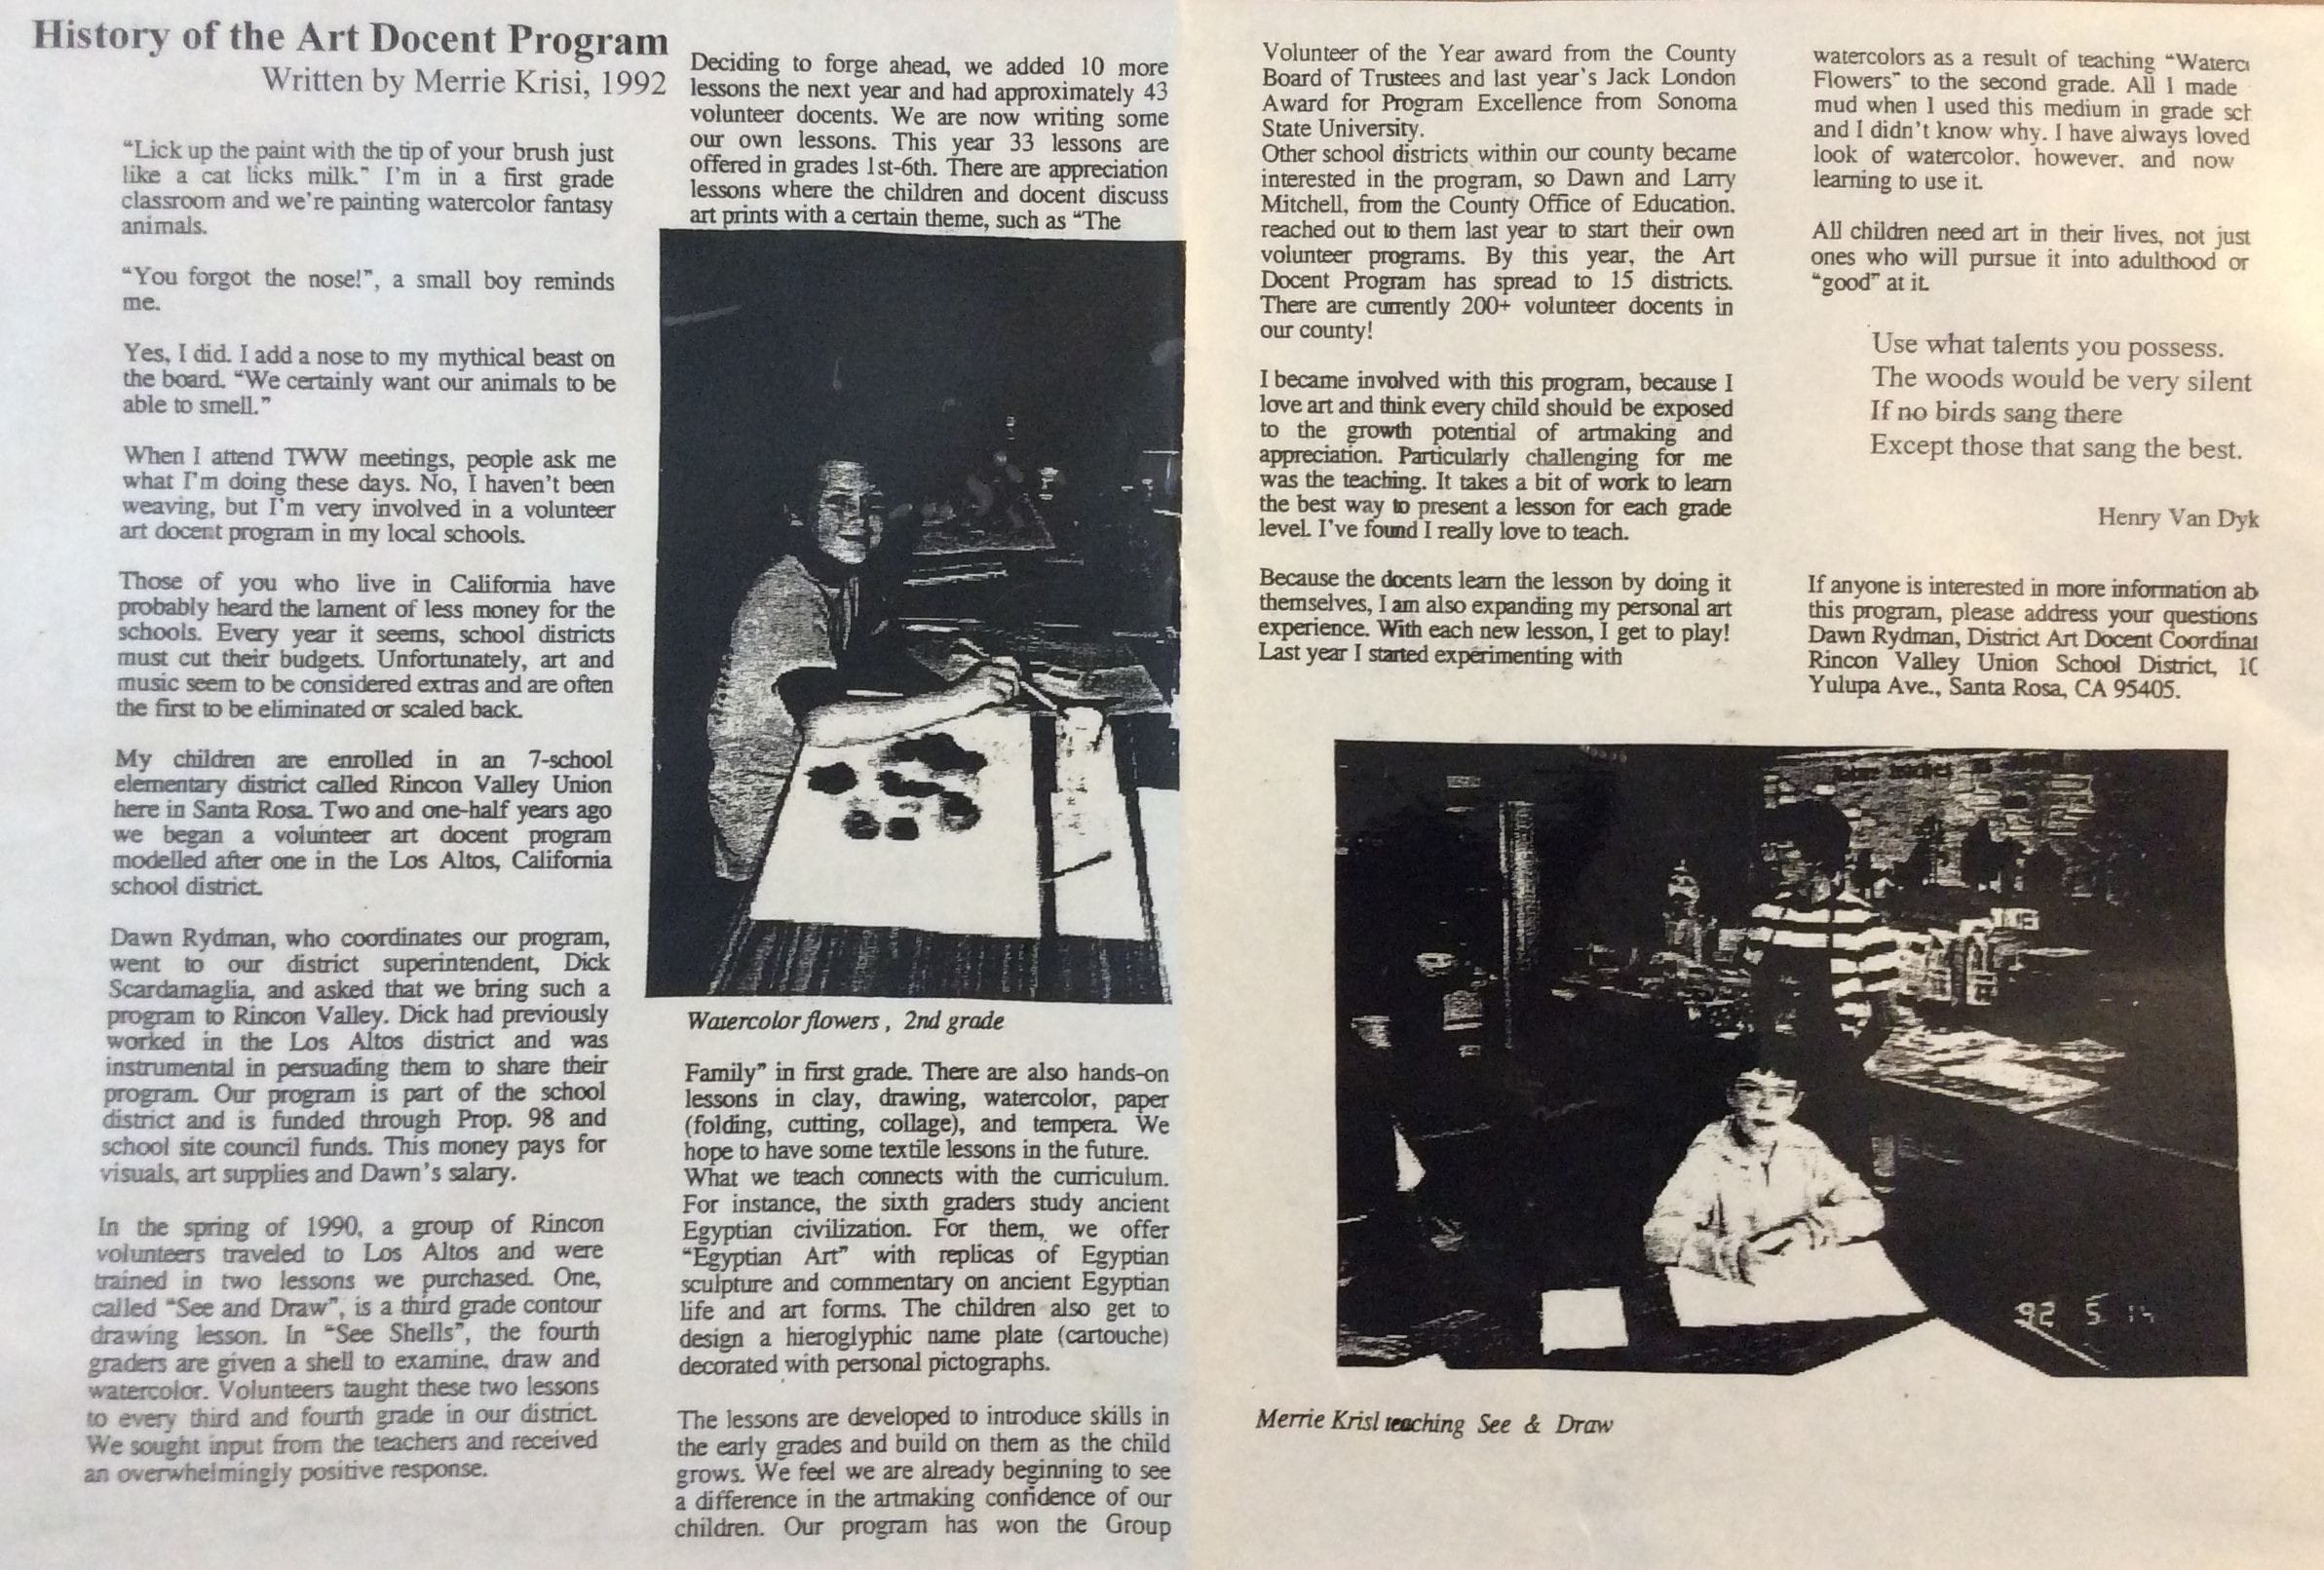 History of The Art Docent Program in Newspaper